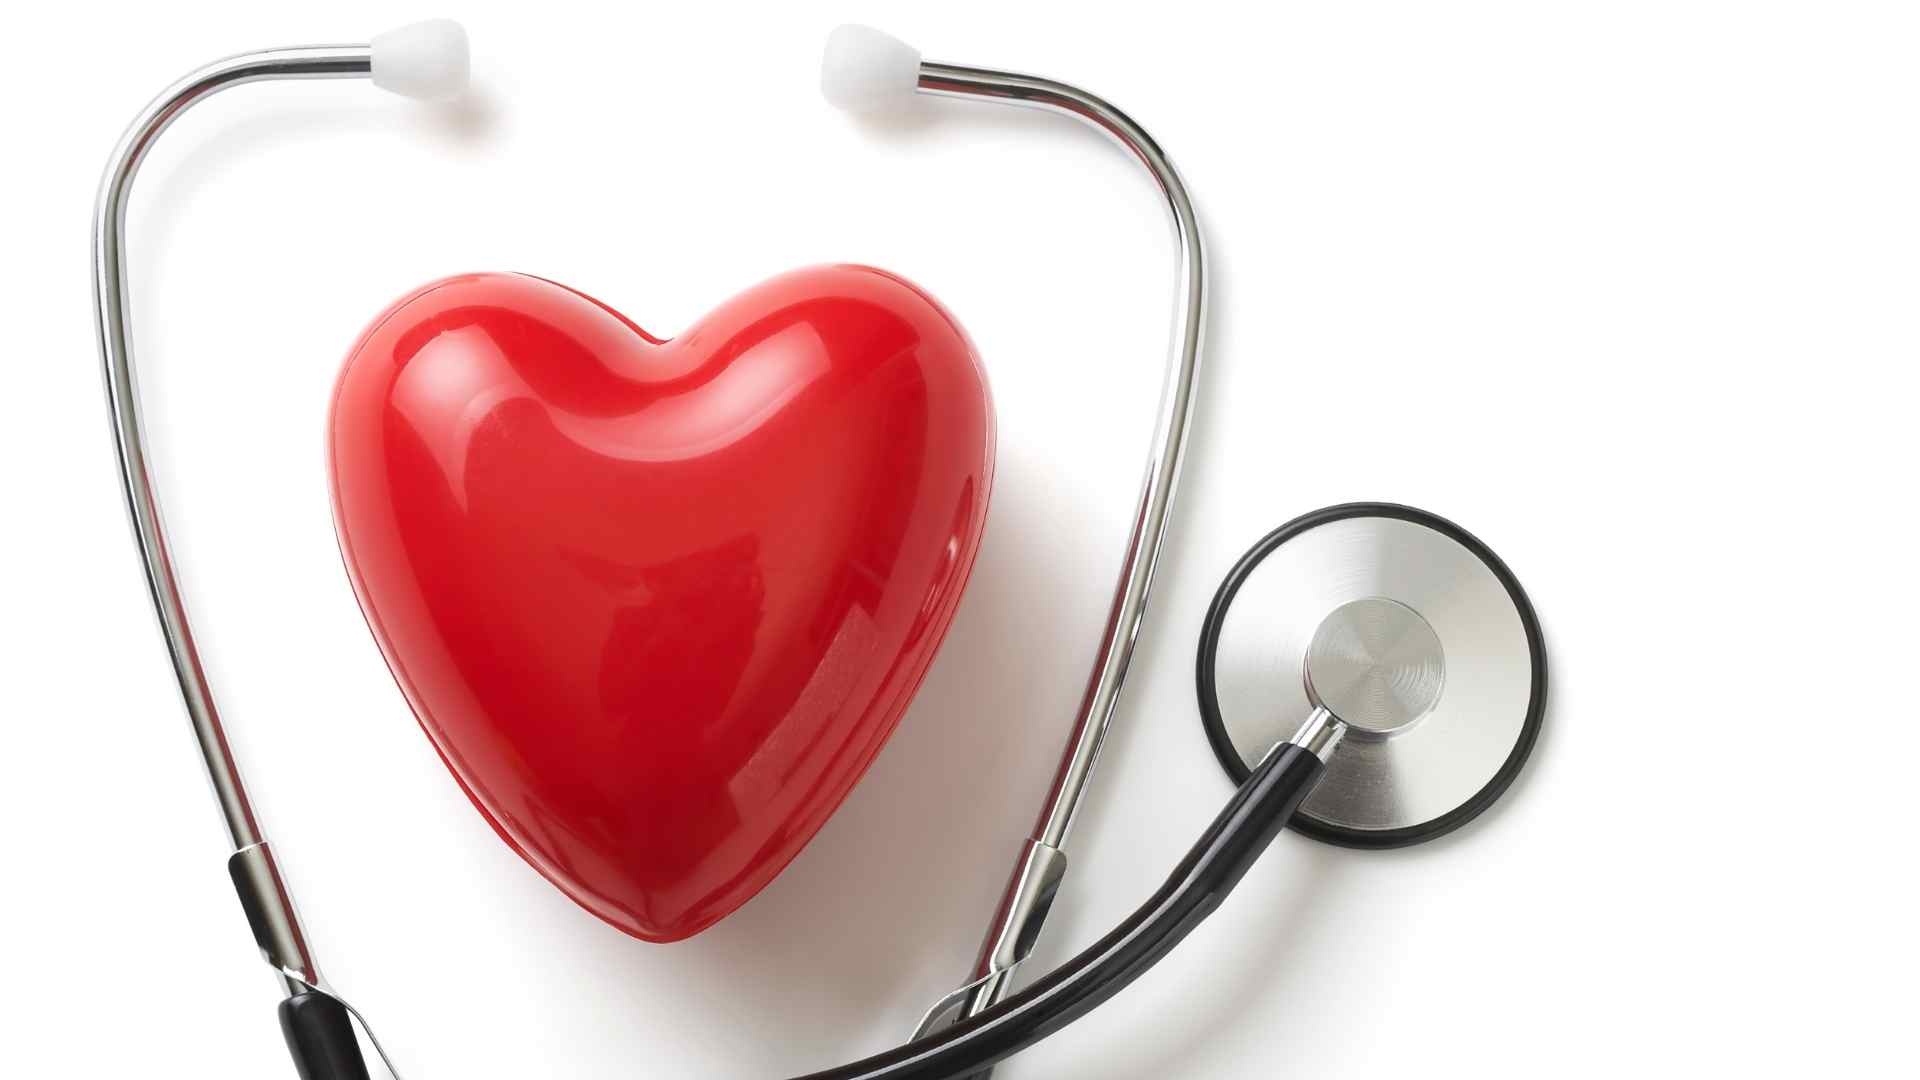 Heart Healthy Tips for Seniors in Honor of American Heart Month